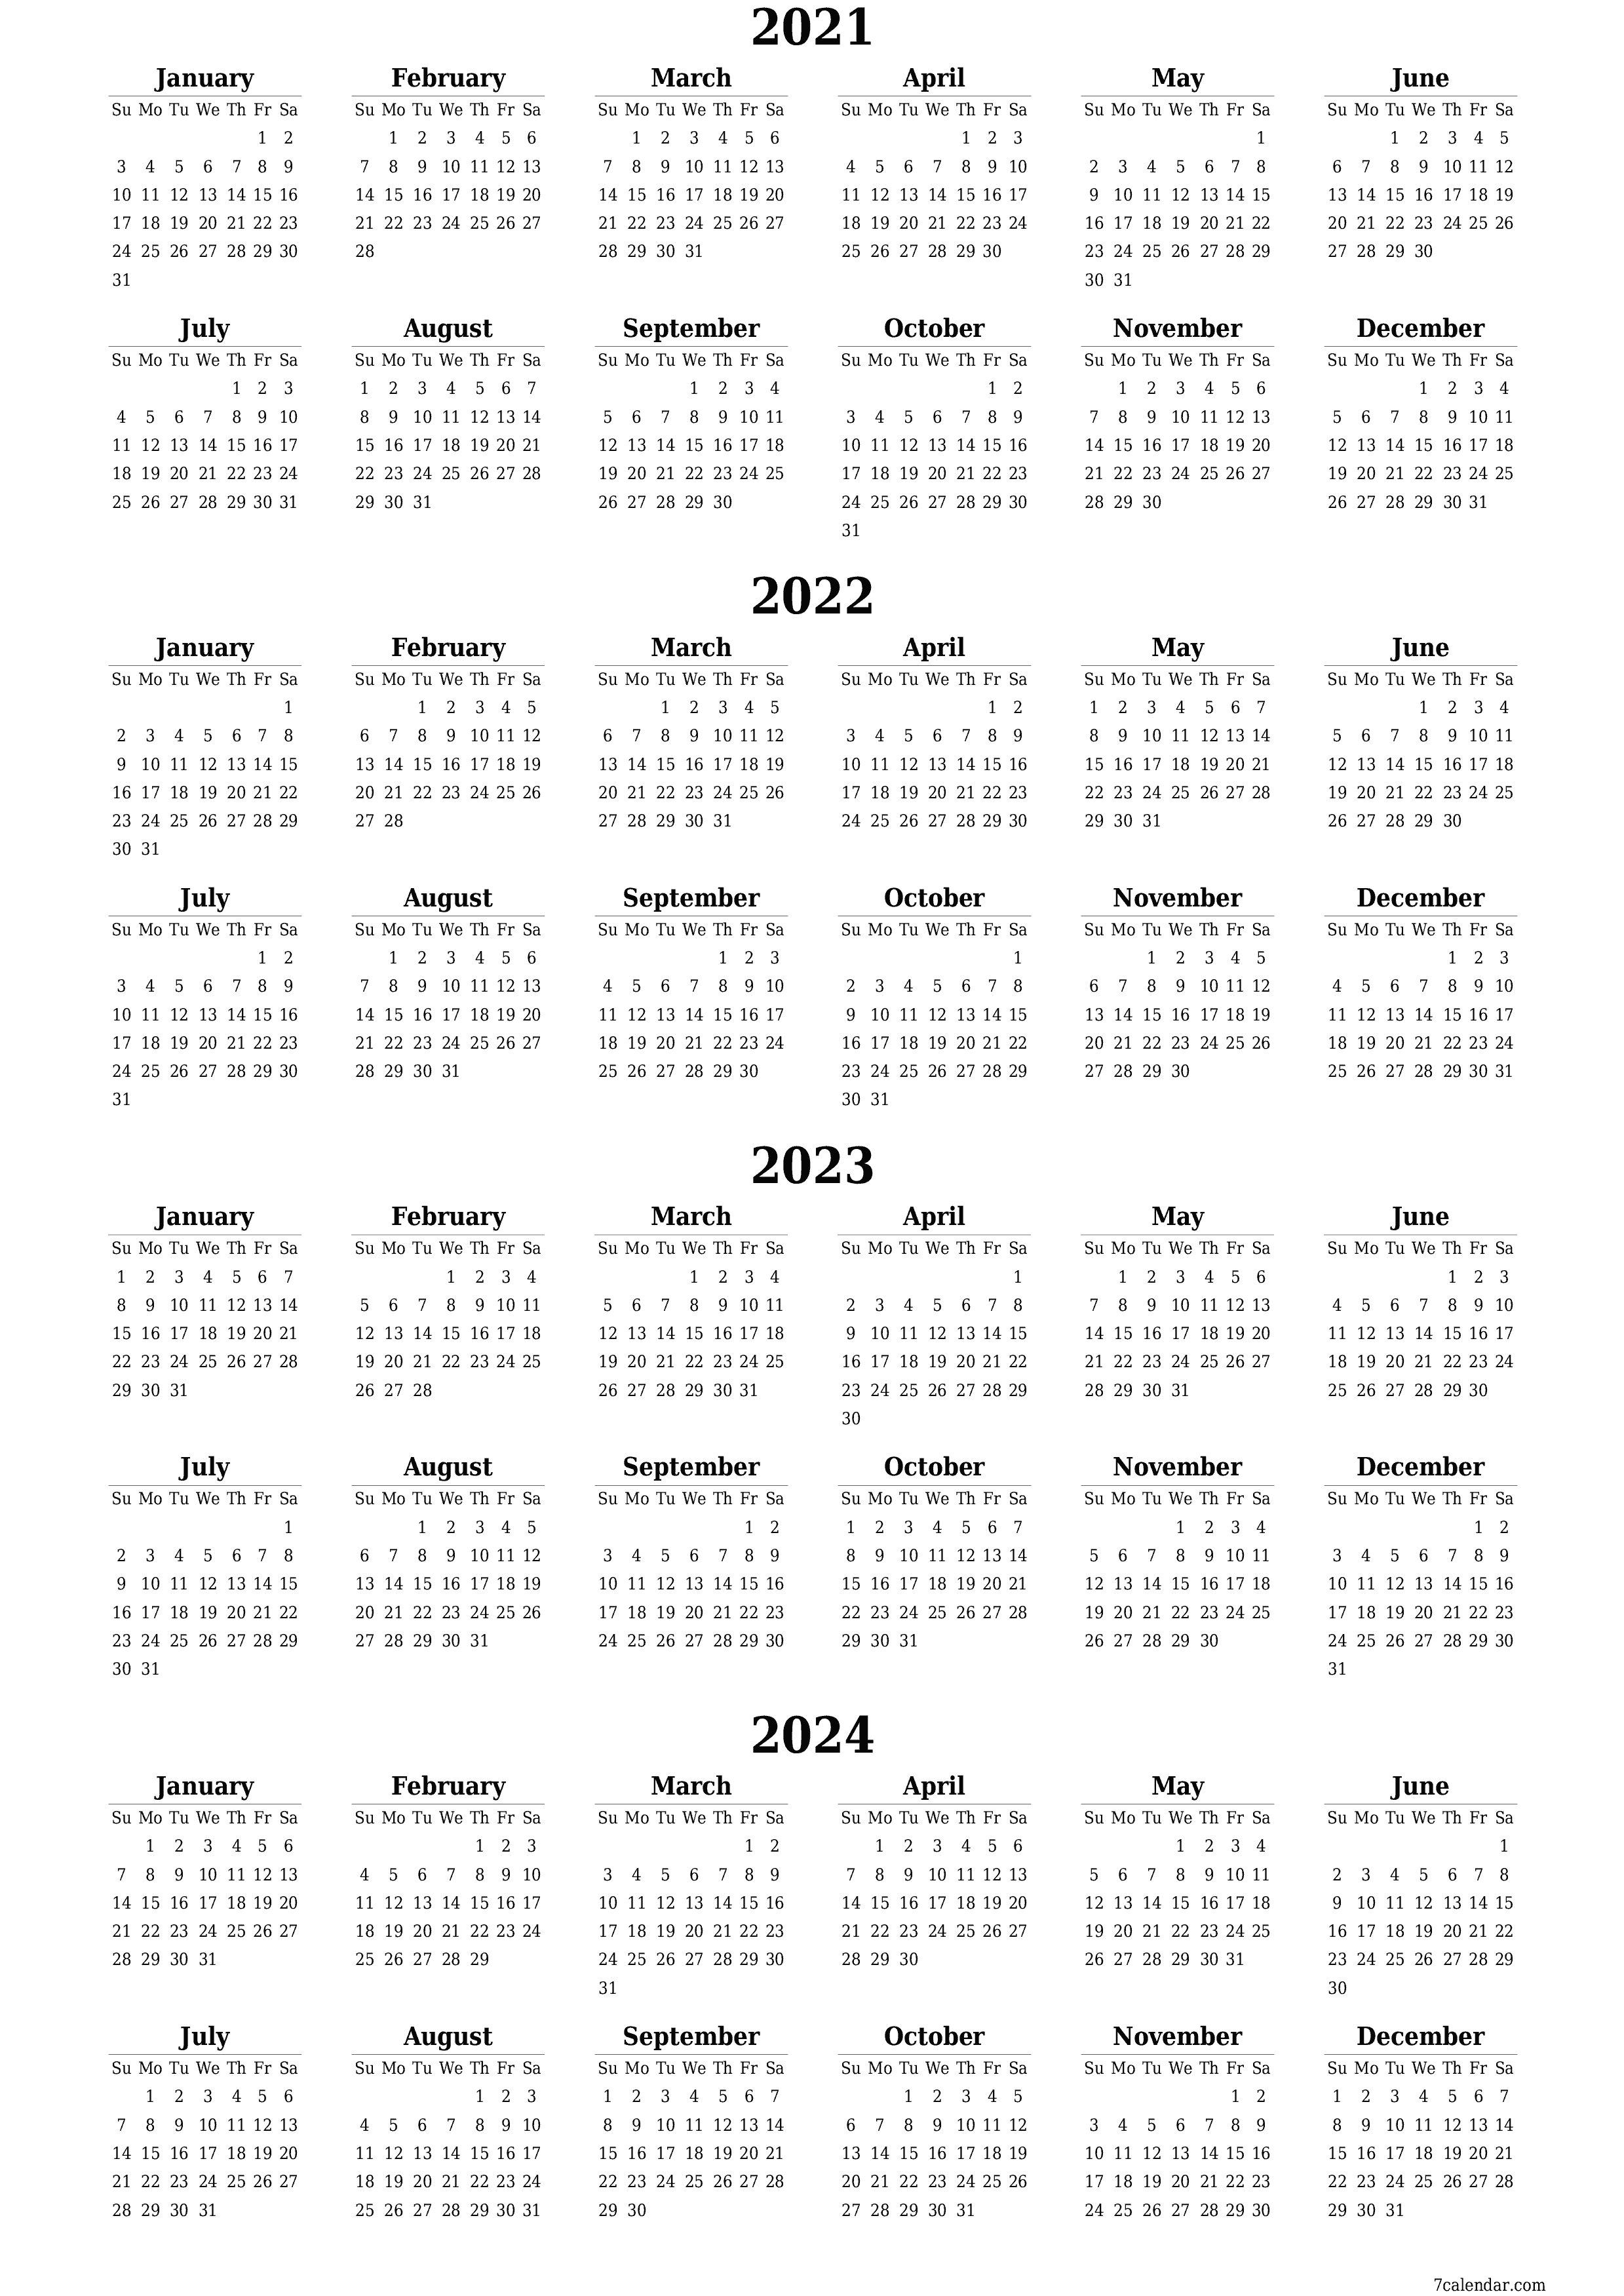 Blank yearly printable calendar and planner for the year 2021, 2022, 2023, 2024 with notes, save and print to PDF PNG English - 7calendar.com